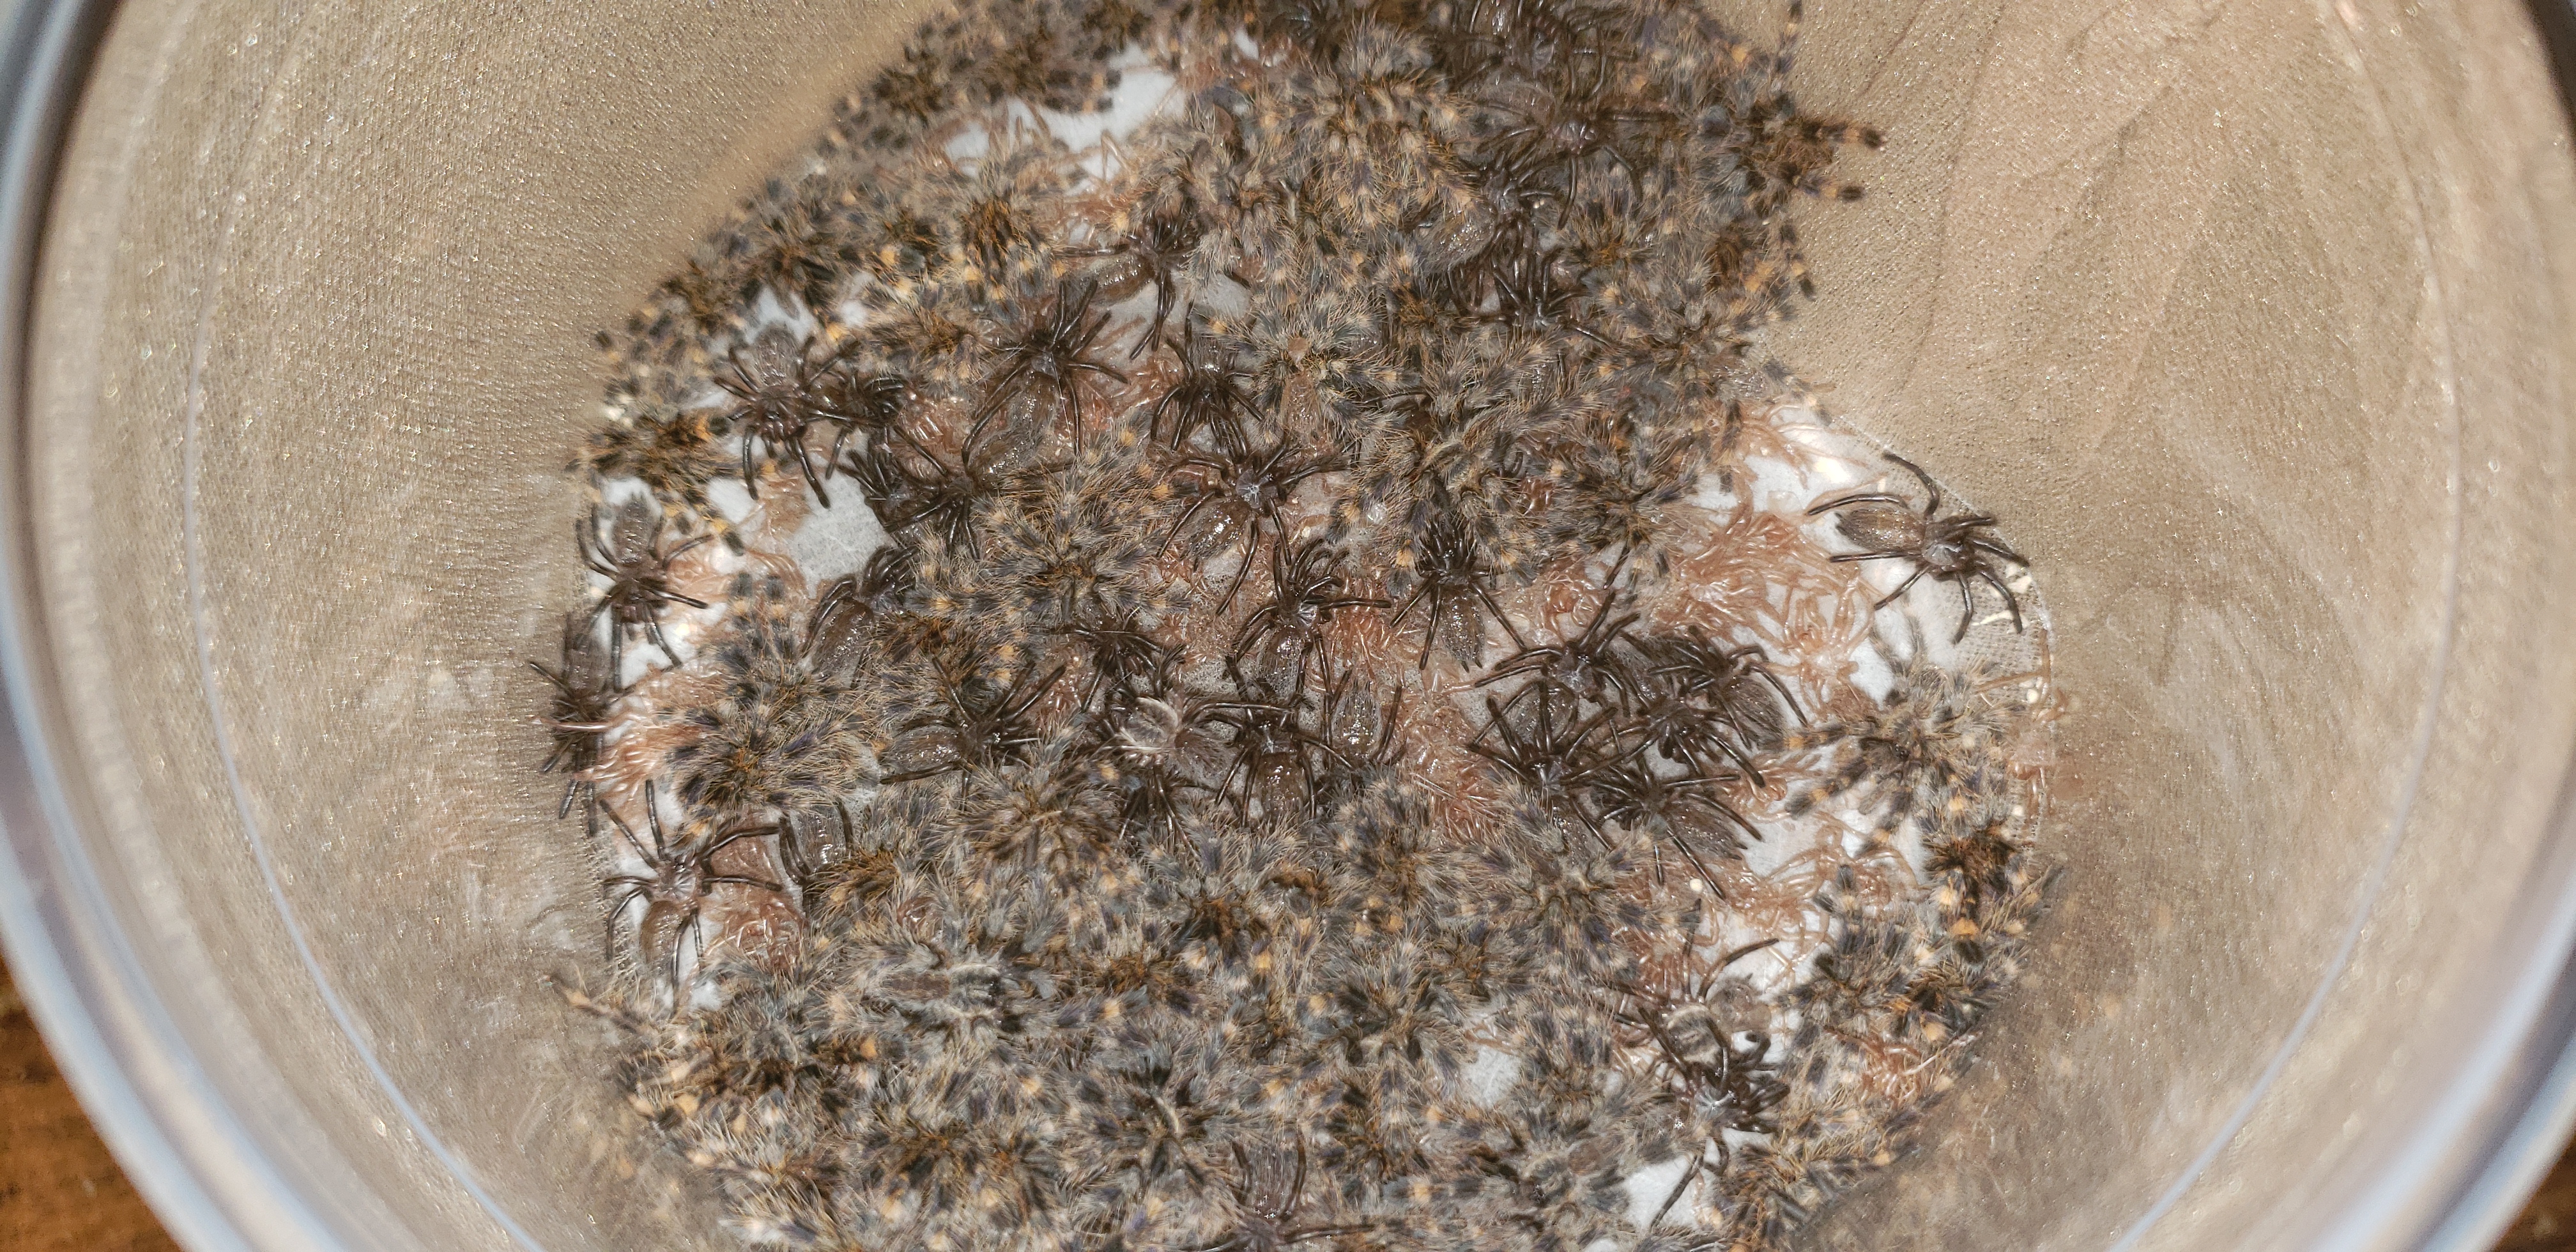 Molting to 2nd instar